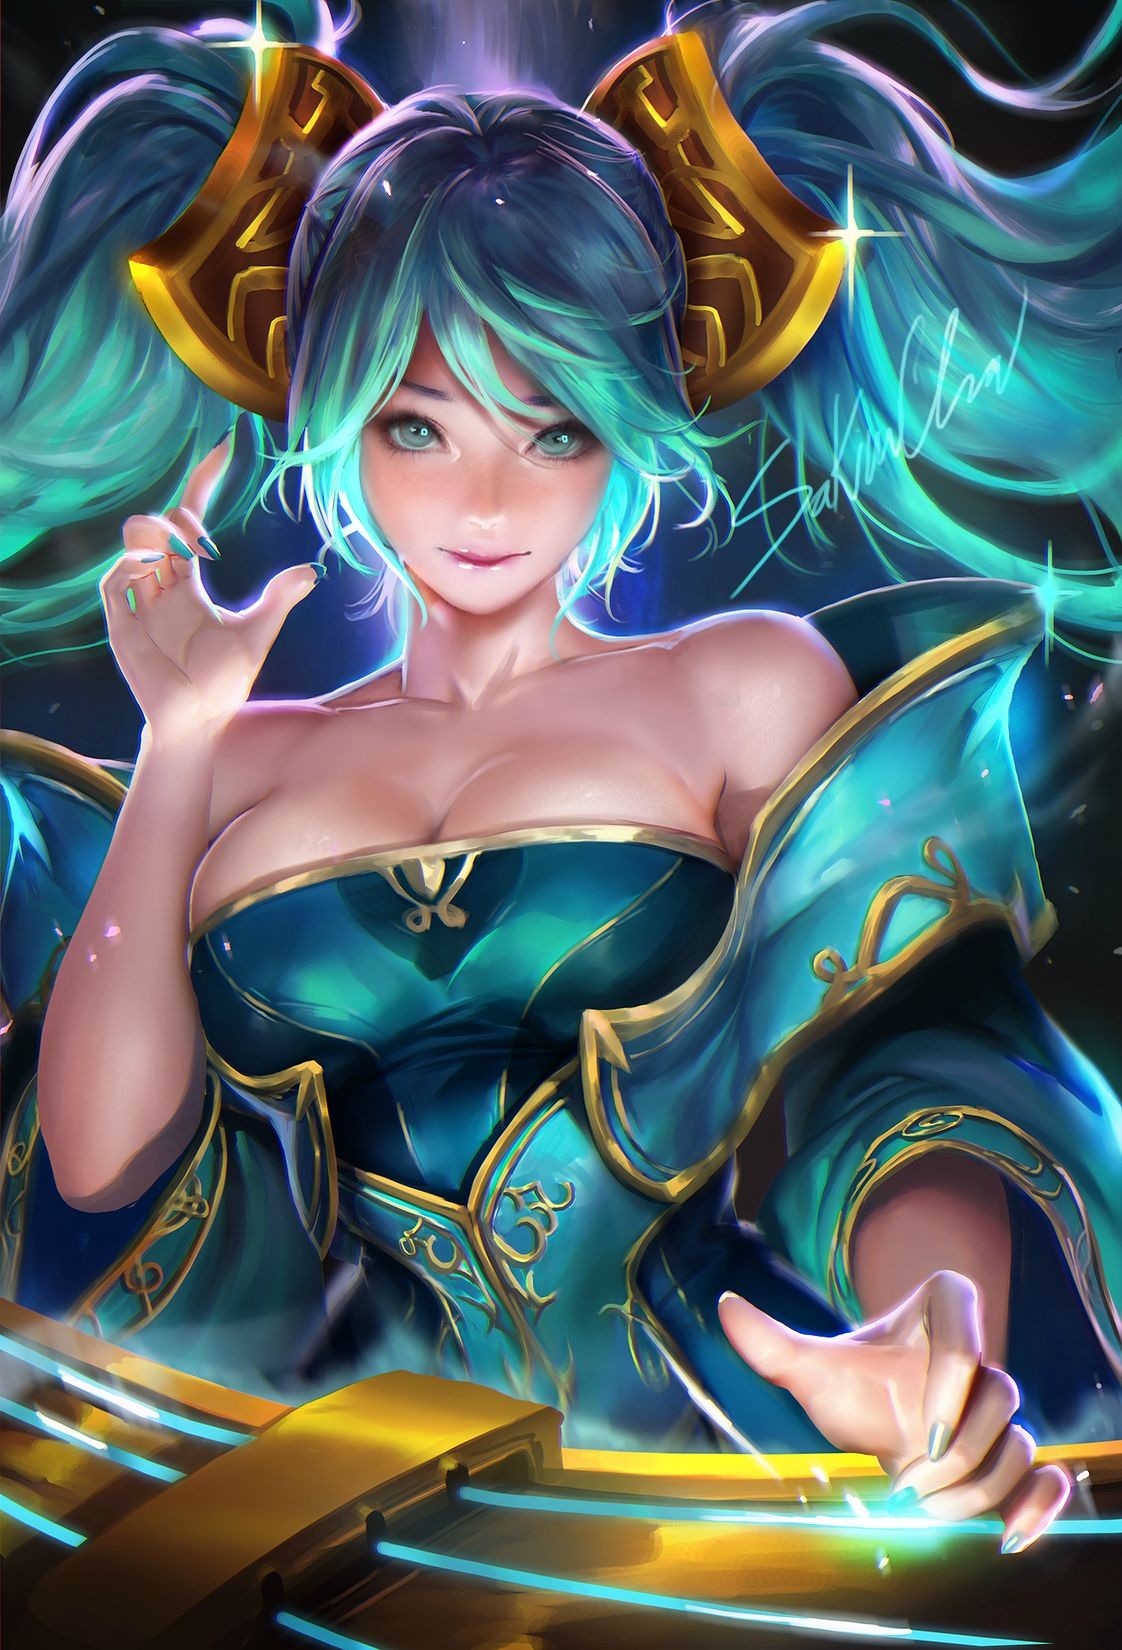 Anime 1122x1650 Sakimichan League of Legends realistic boobs big boobs cyan hair long hair anime girls anime looking at viewer fantasy art fantasy girl women PC gaming video game girls Sona (League of Legends) painted nails